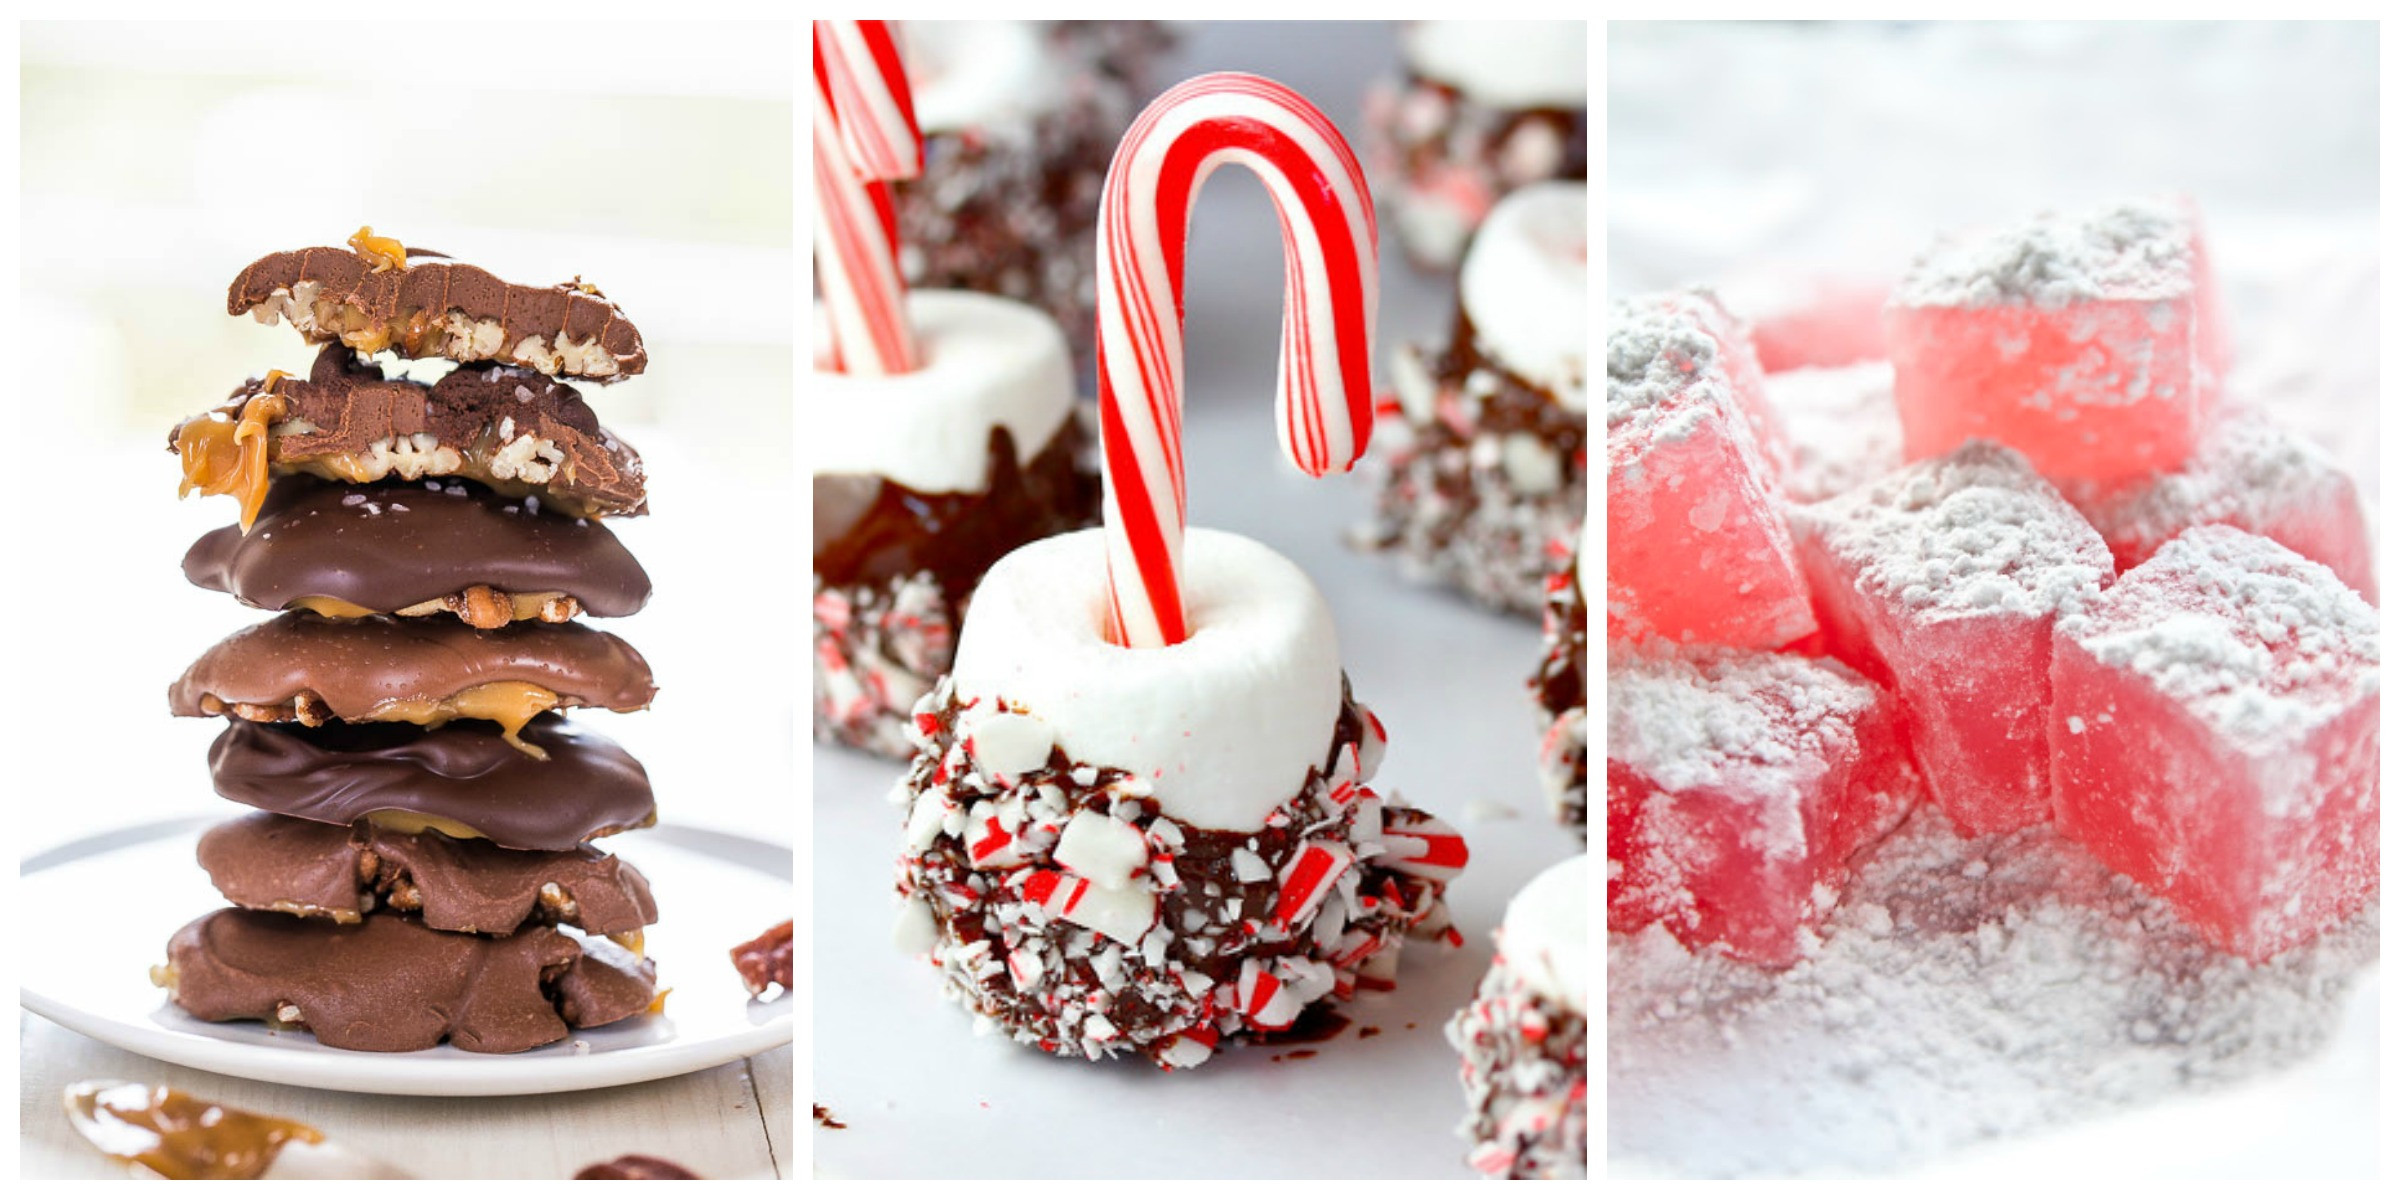 Candy To Make For Christmas
 40 Easy Christmas Candy Recipes Ideas for Homemade